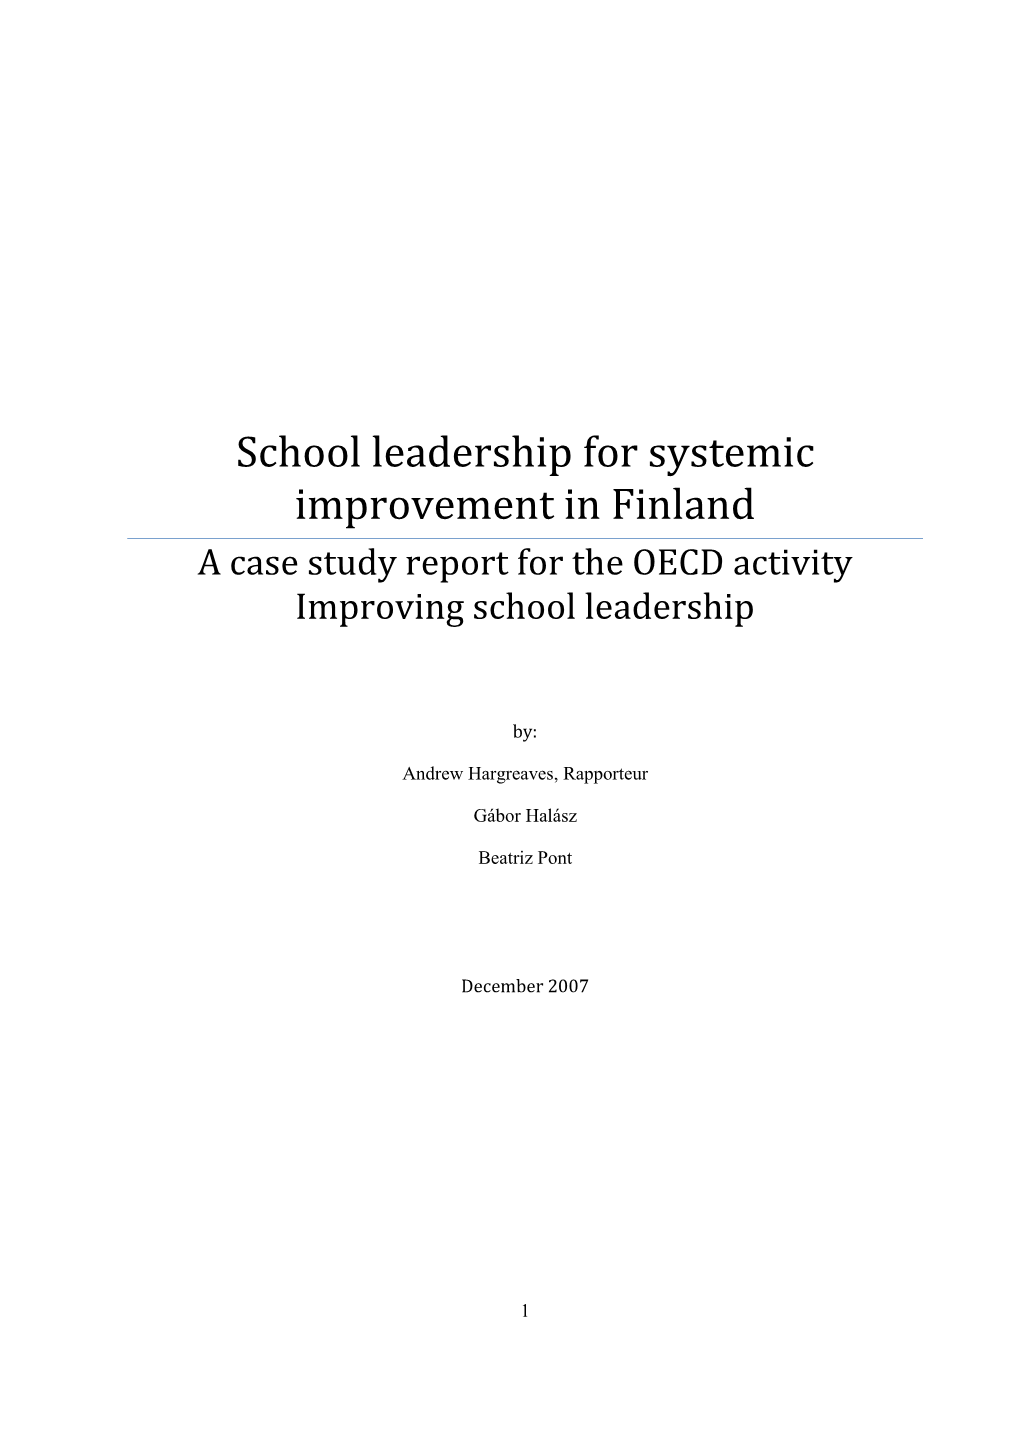 School Leadership for Systemic Improvement in Finland a Case Study Report for the OECD Activity Improving School Leadership